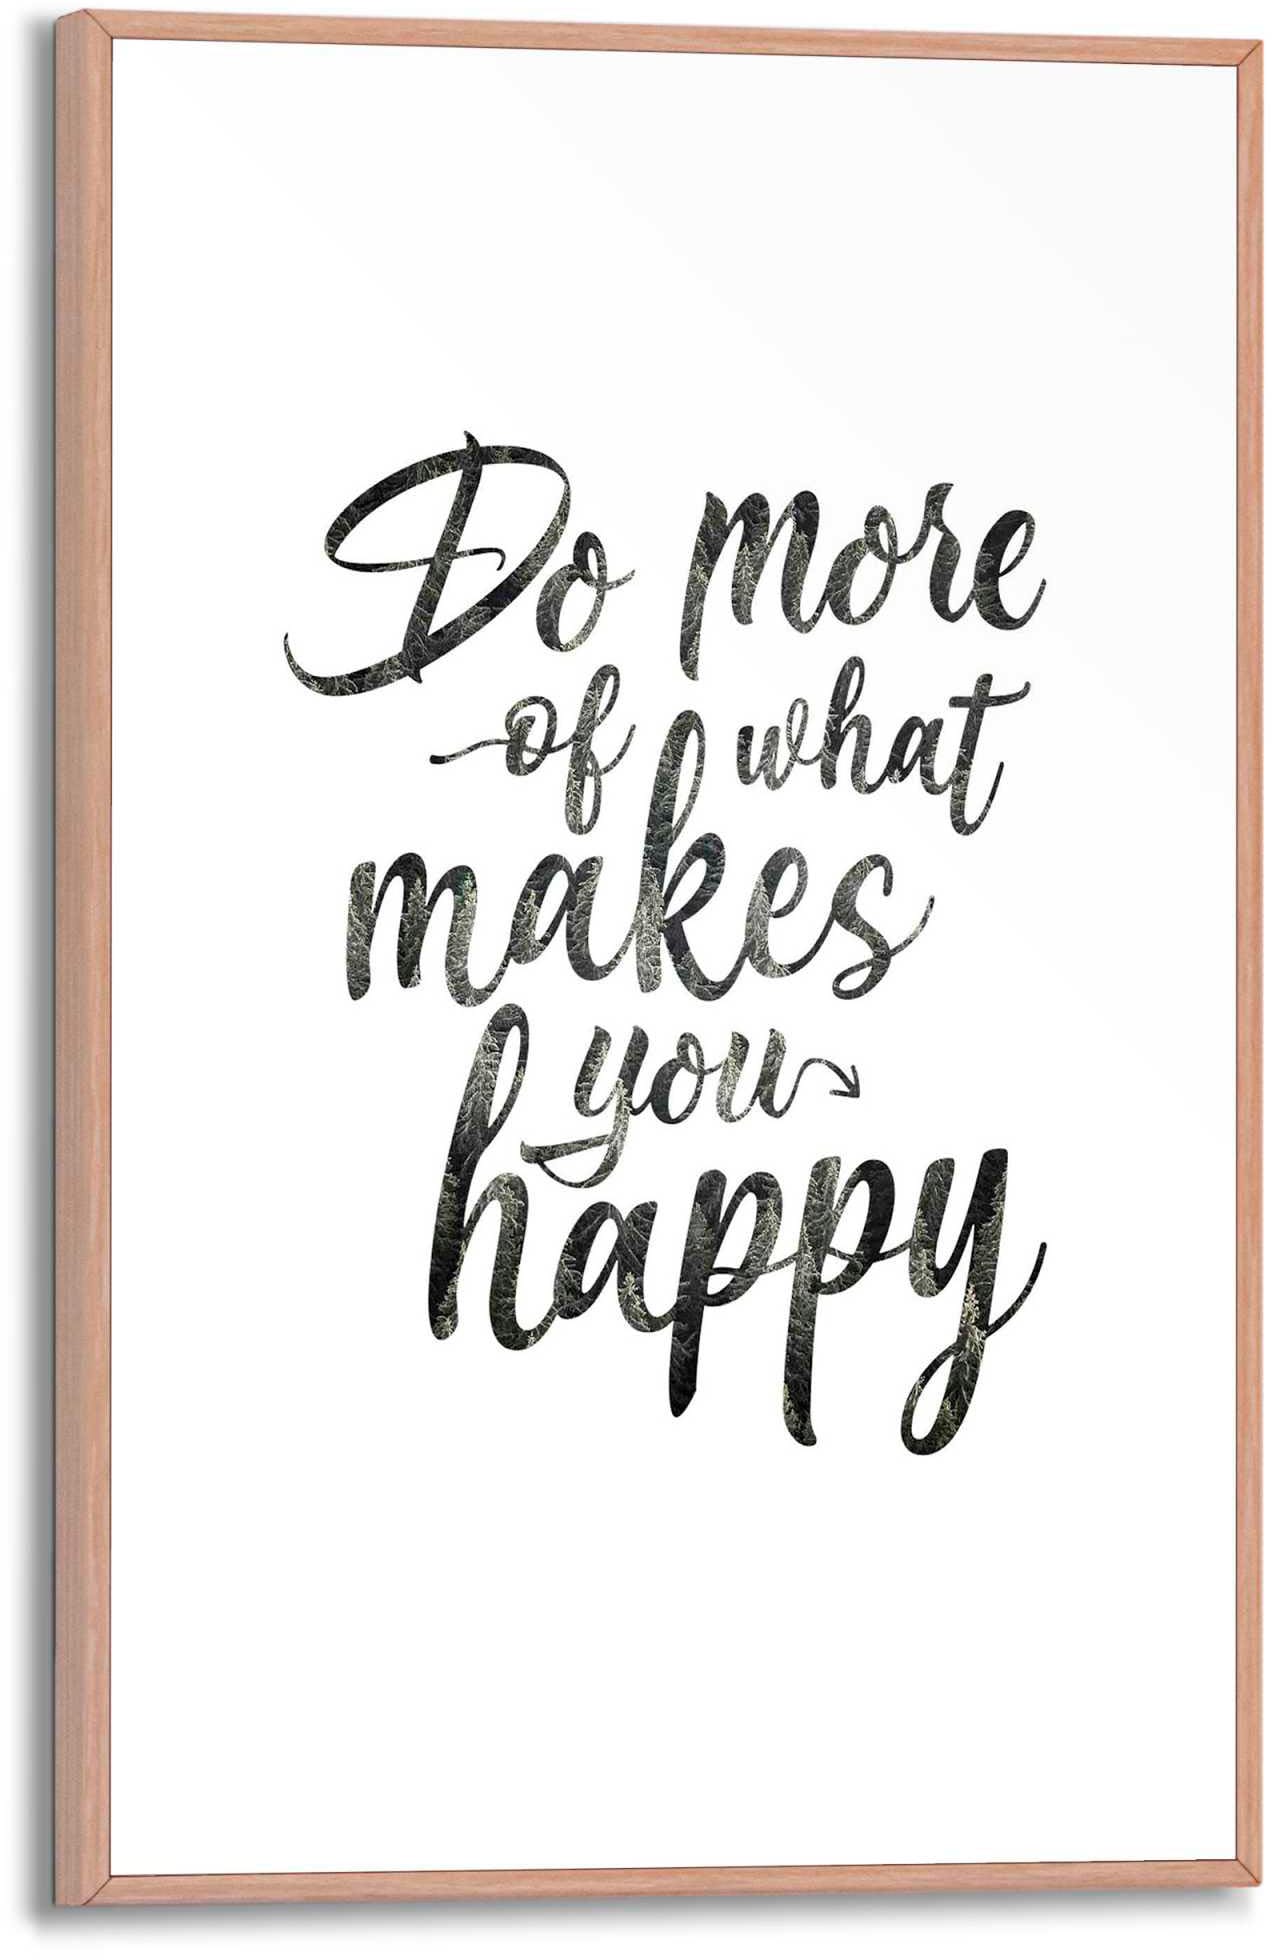 Reinders! Poster »Do more of what makes you happy« von Reinders!